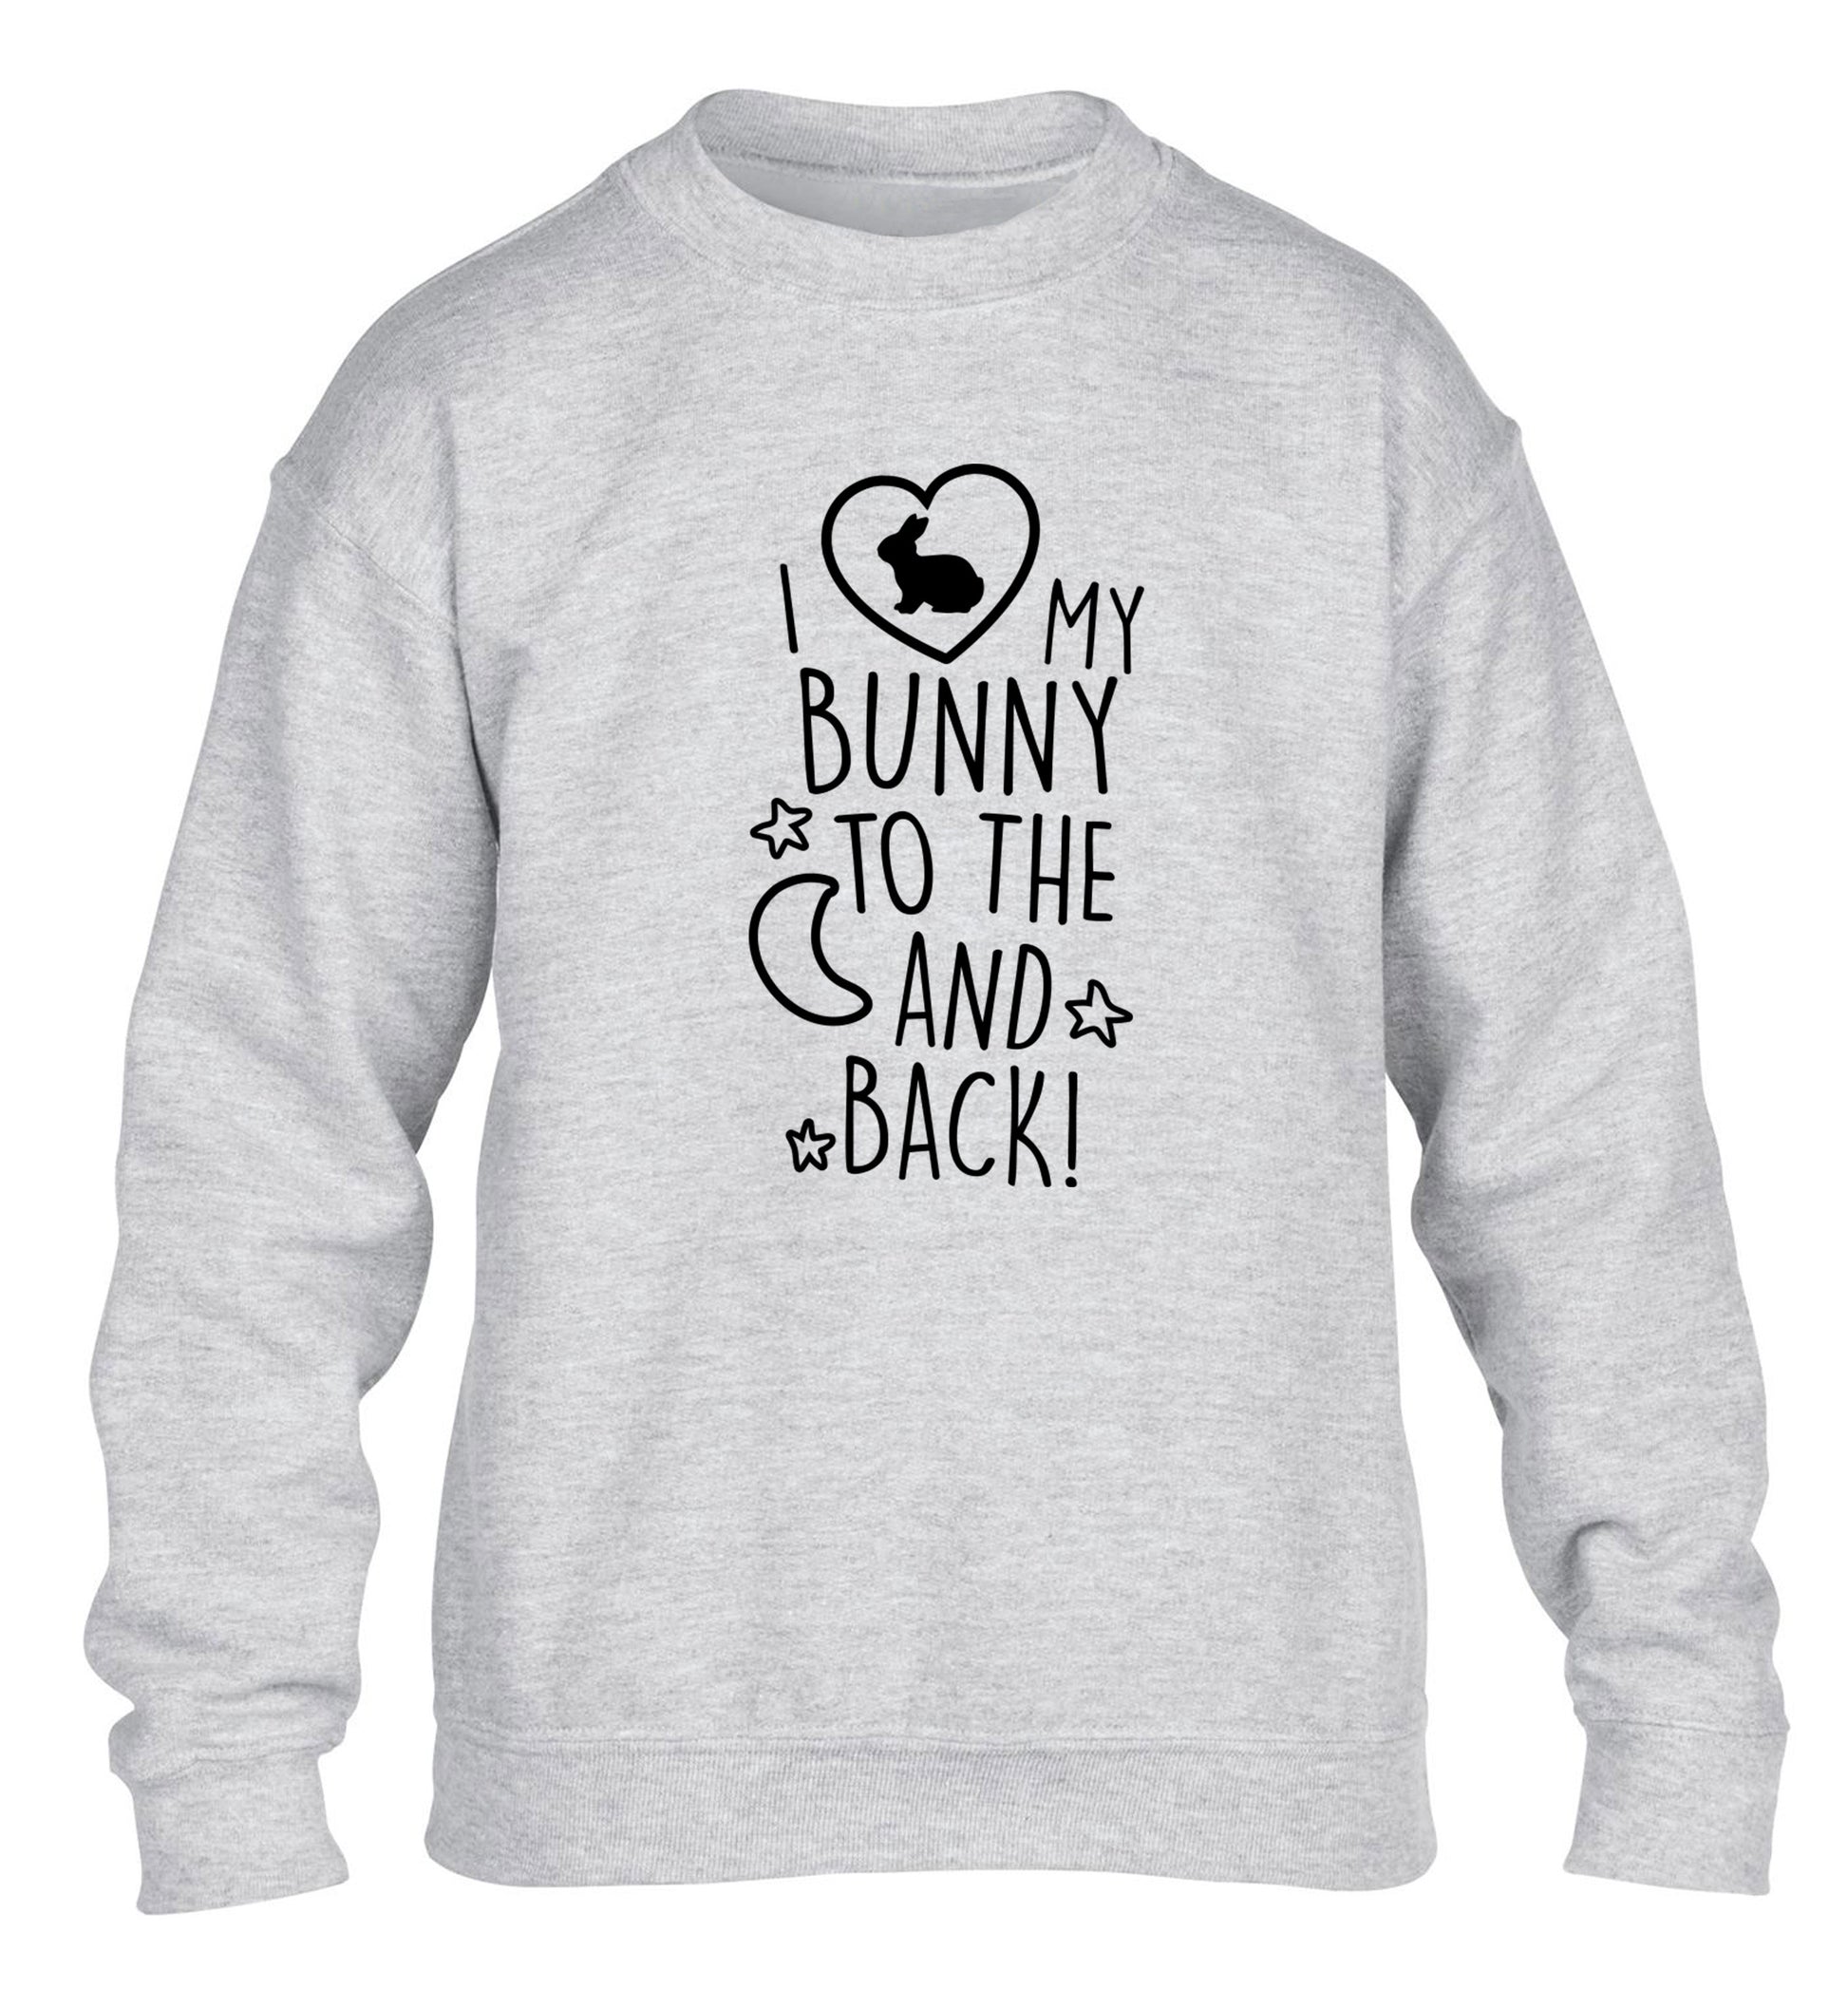 I love my bunny to the moon and back children's grey  sweater 12-14 Years